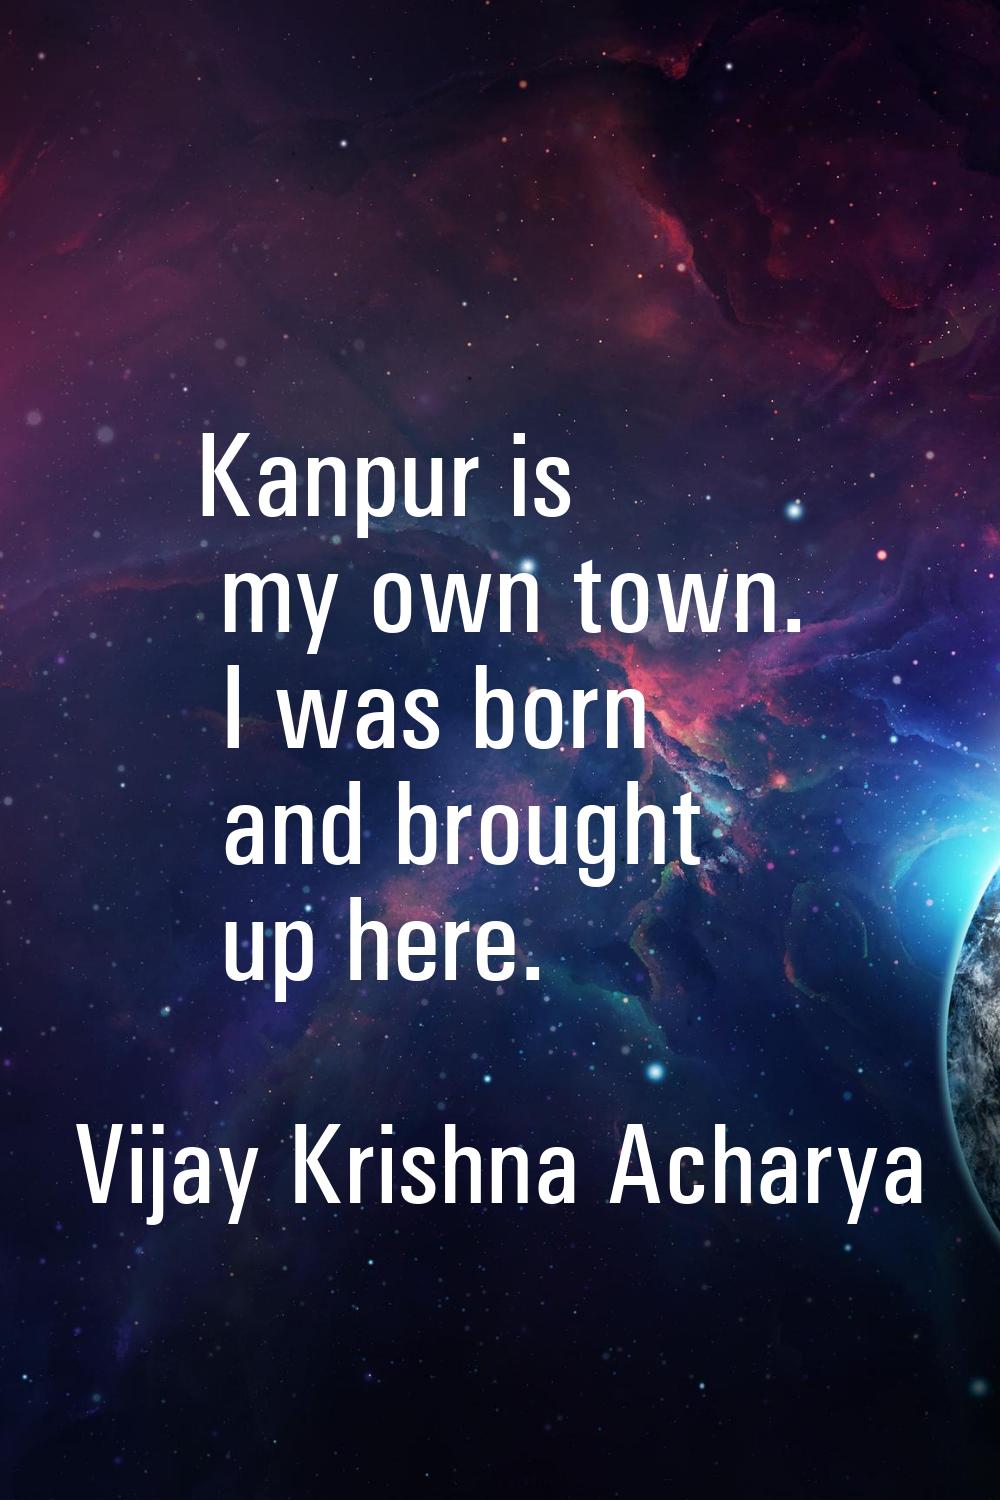 Kanpur is my own town. I was born and brought up here.